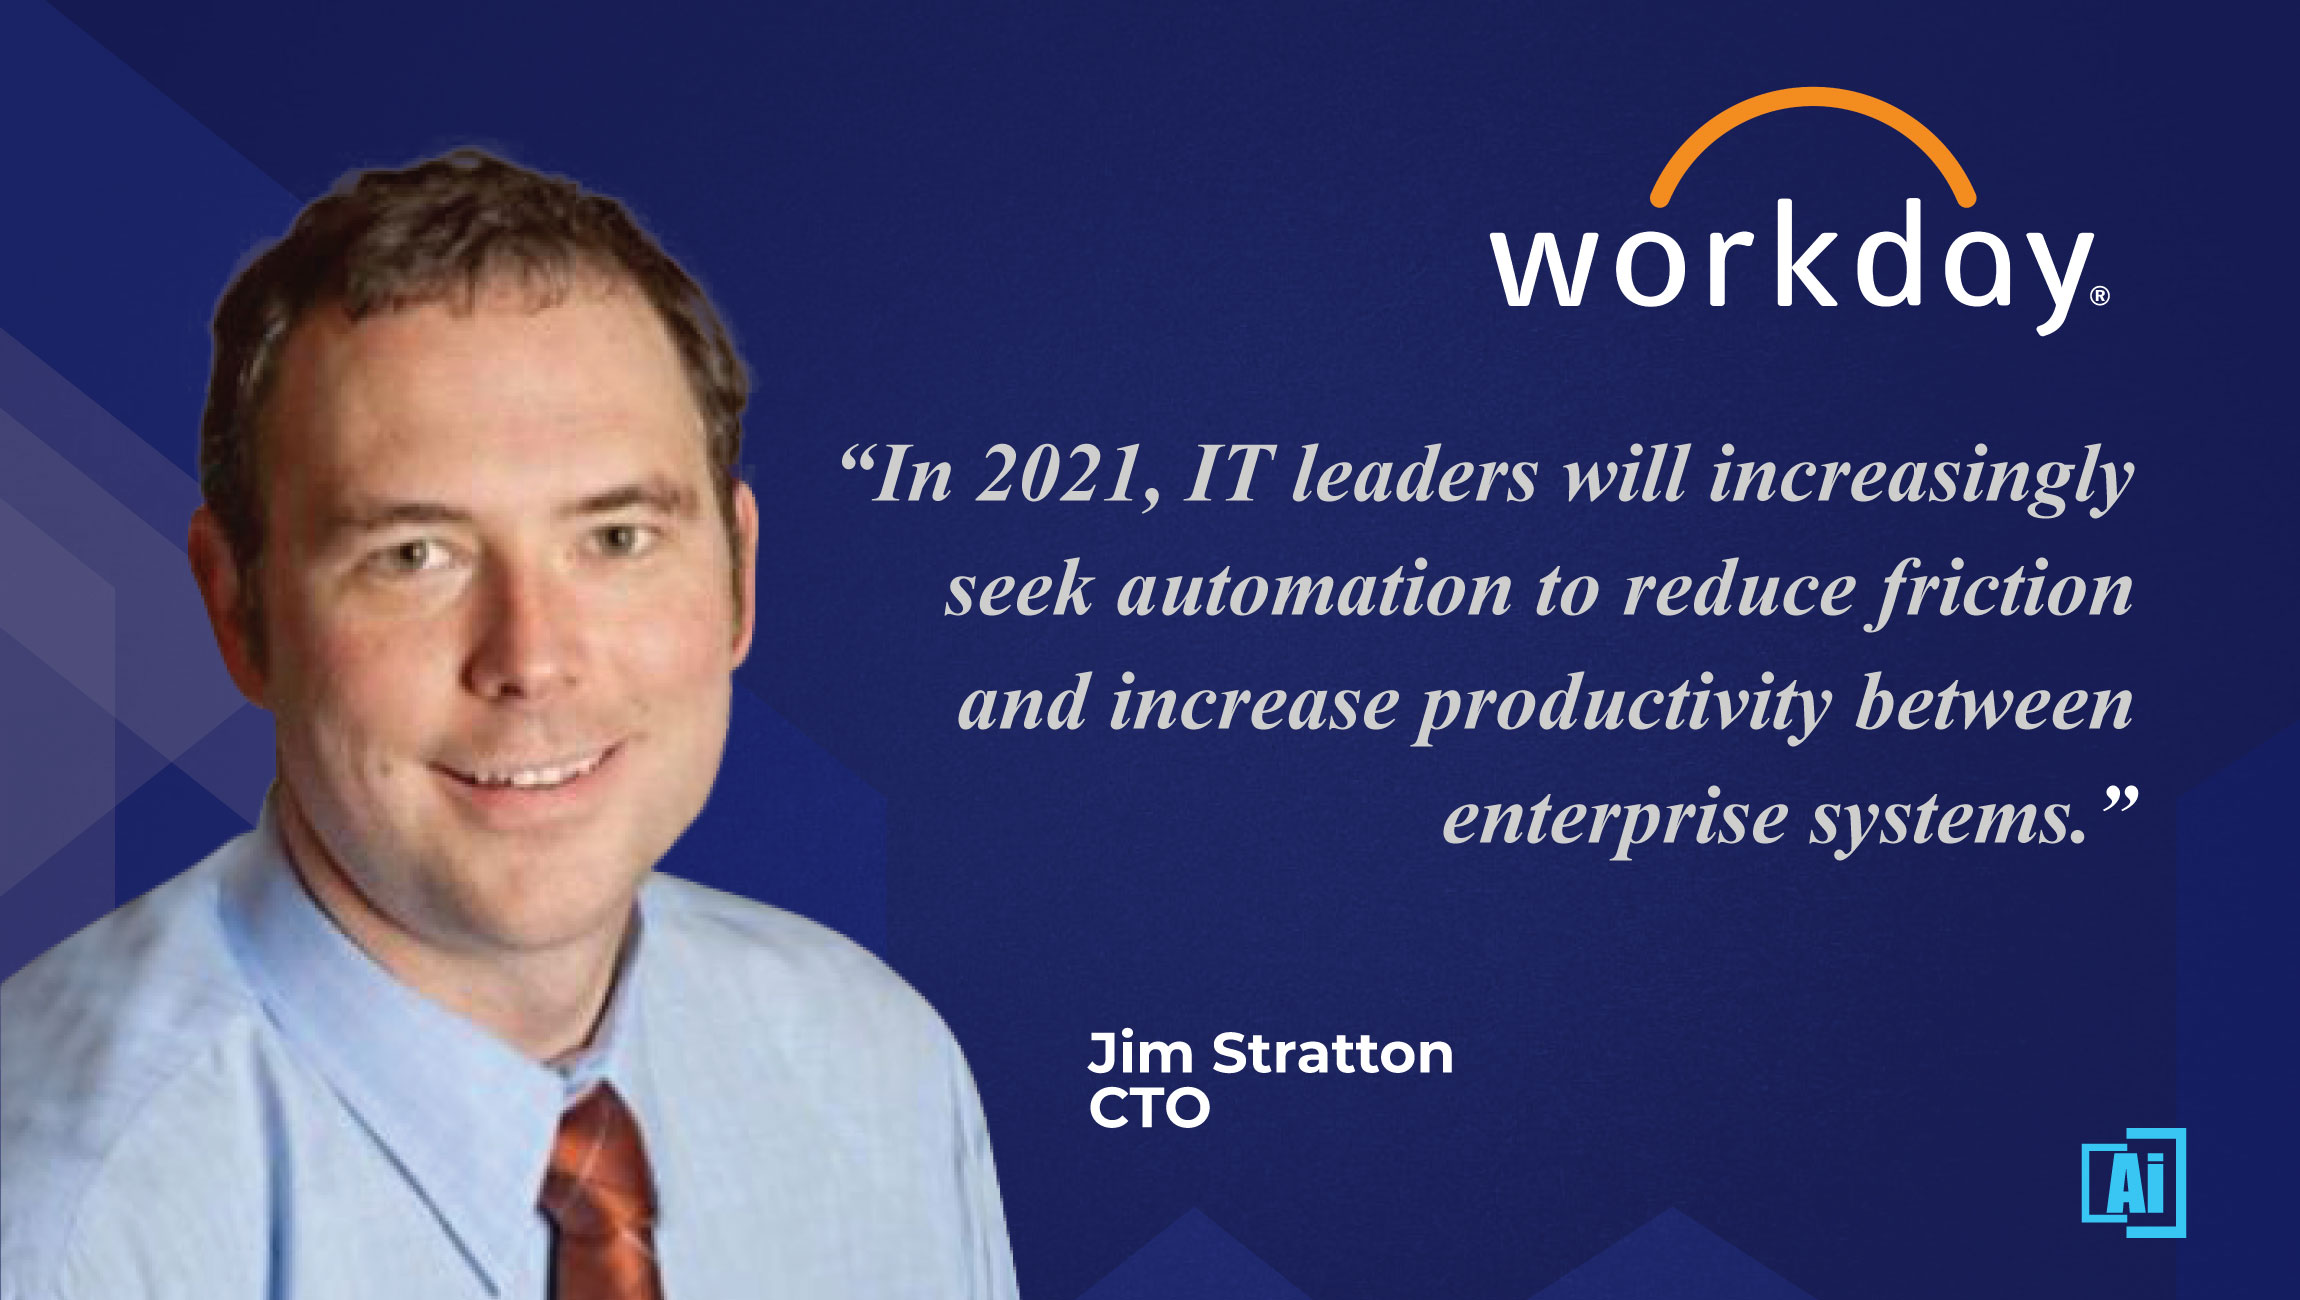 Crystal Gaze 2021: AiThority Interview with Jim Stratton, CTO, Workday